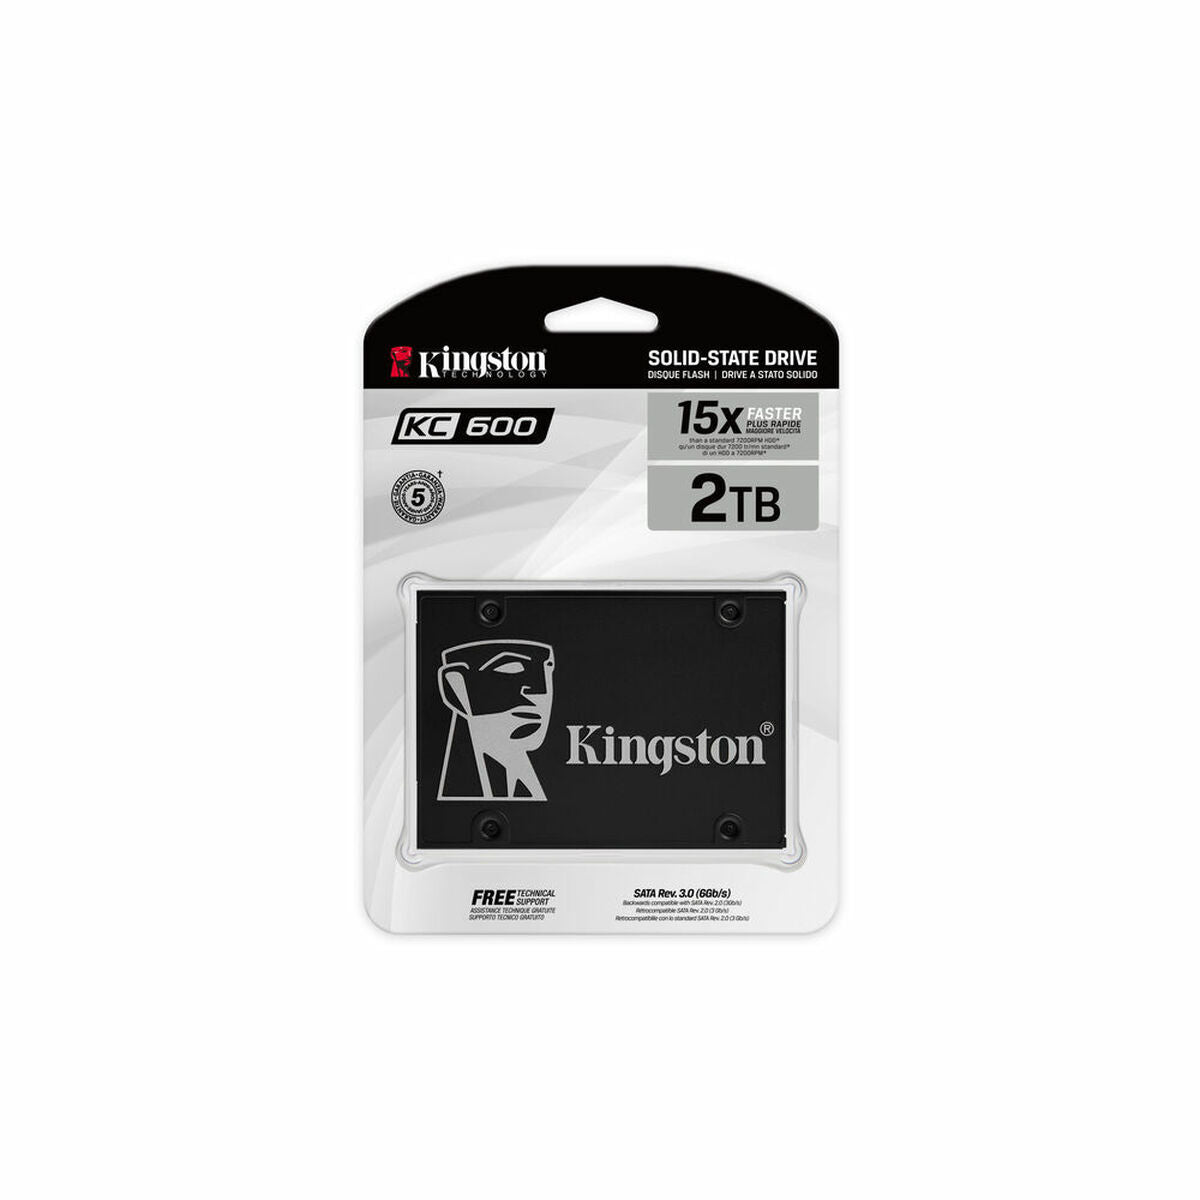 Hard Drive Kingston SKC600/2048G 2 TB 2 TB SSD, Kingston, Computing, Data storage, hard-drive-kingston-skc600-2048g-2-tb-2-tb-ssd, Brand_Kingston, category-reference-2609, category-reference-2803, category-reference-2806, category-reference-t-19685, category-reference-t-19909, category-reference-t-21357, computers / components, Condition_NEW, Price_200 - 300, Teleworking, RiotNook